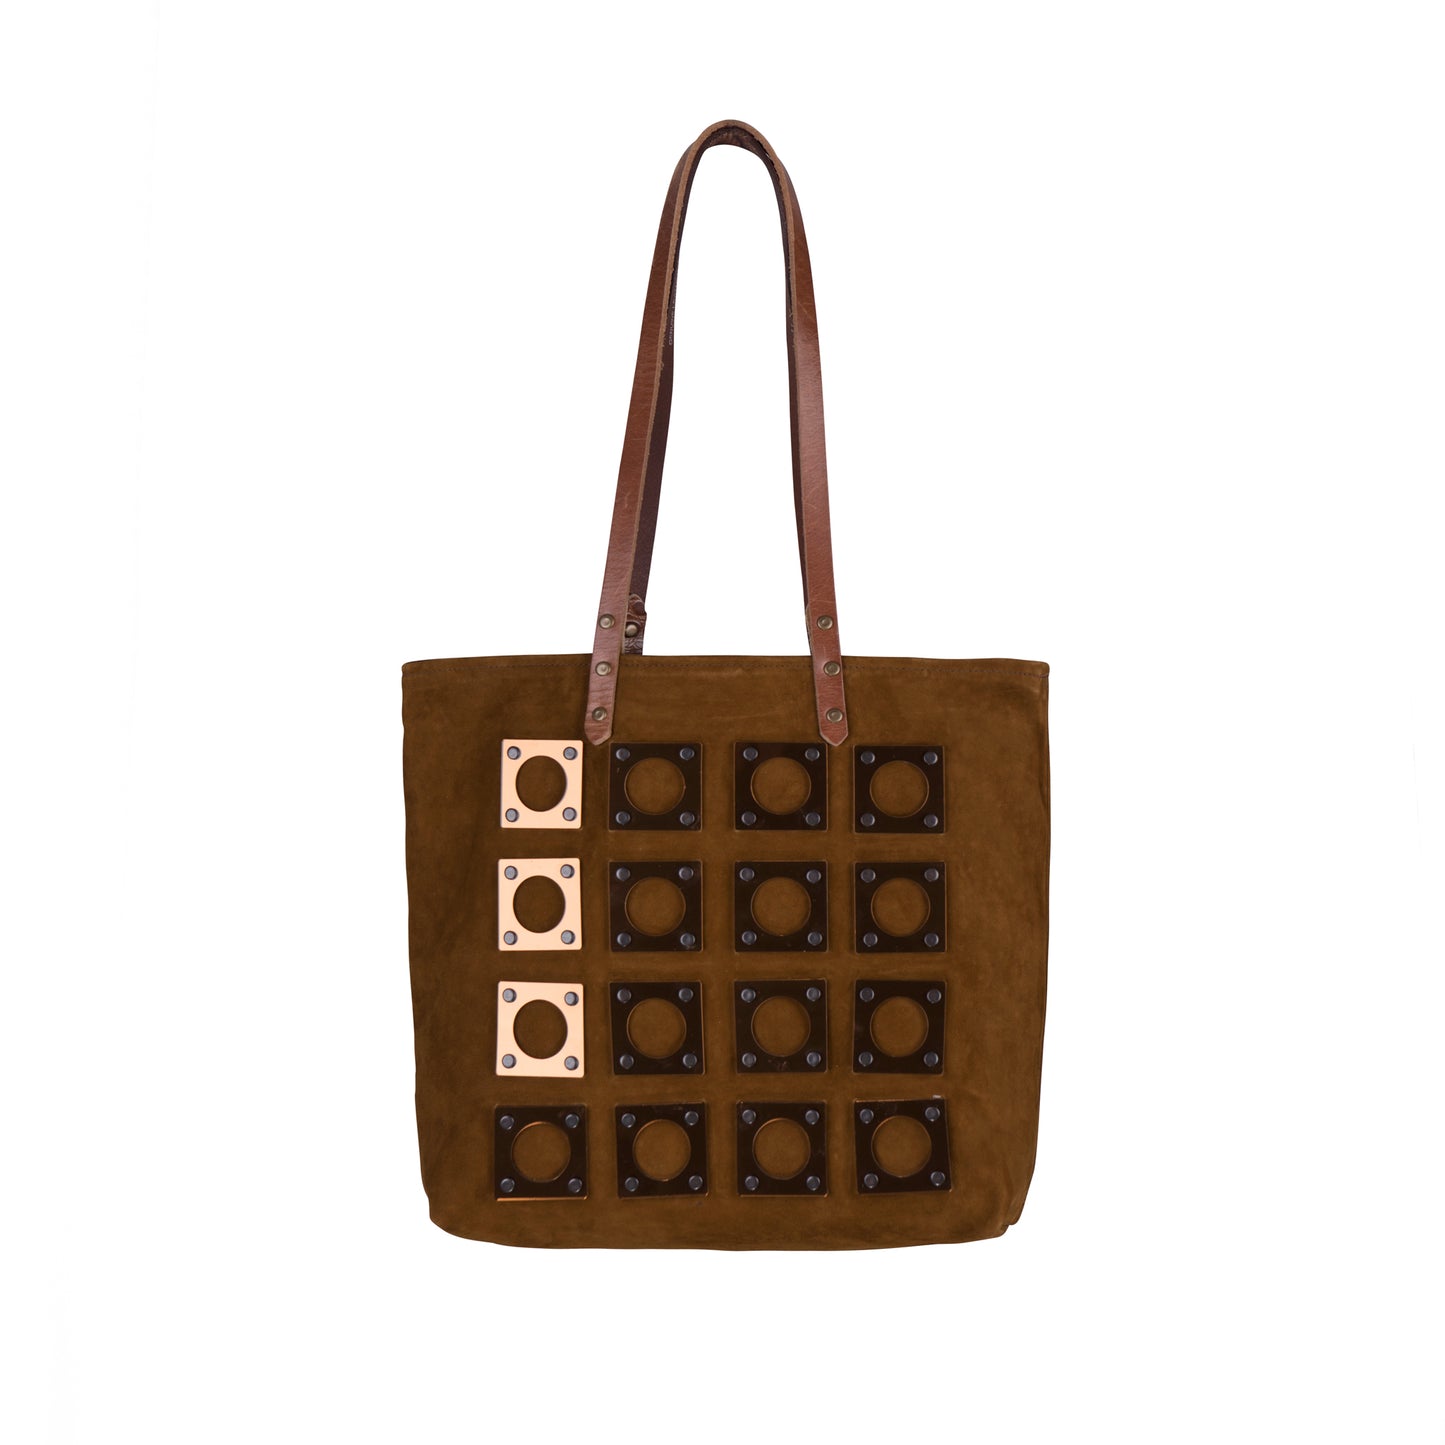 METANoIA caramel recycled leather medium handbag with square and hollowed circle copper acrylic forms fashioned into a repeative fashion. 